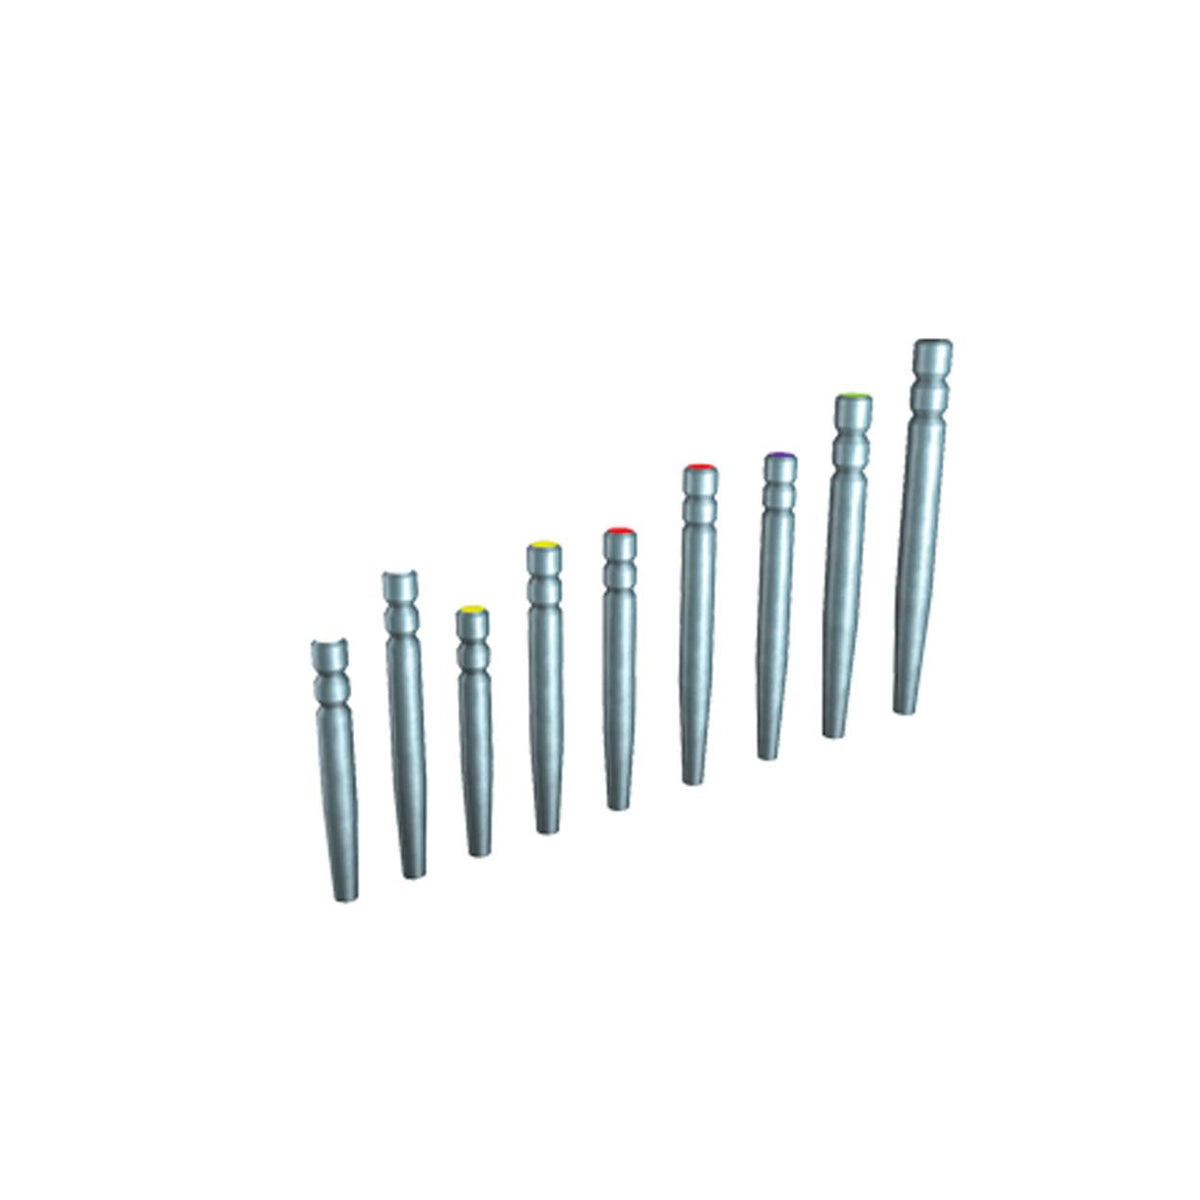 DentrealStore - Itena Dentoclic Sanded Titanium Cylindro-Conical Posts Refil - Length : 9,5 mm - Diameter: 1.3 mm